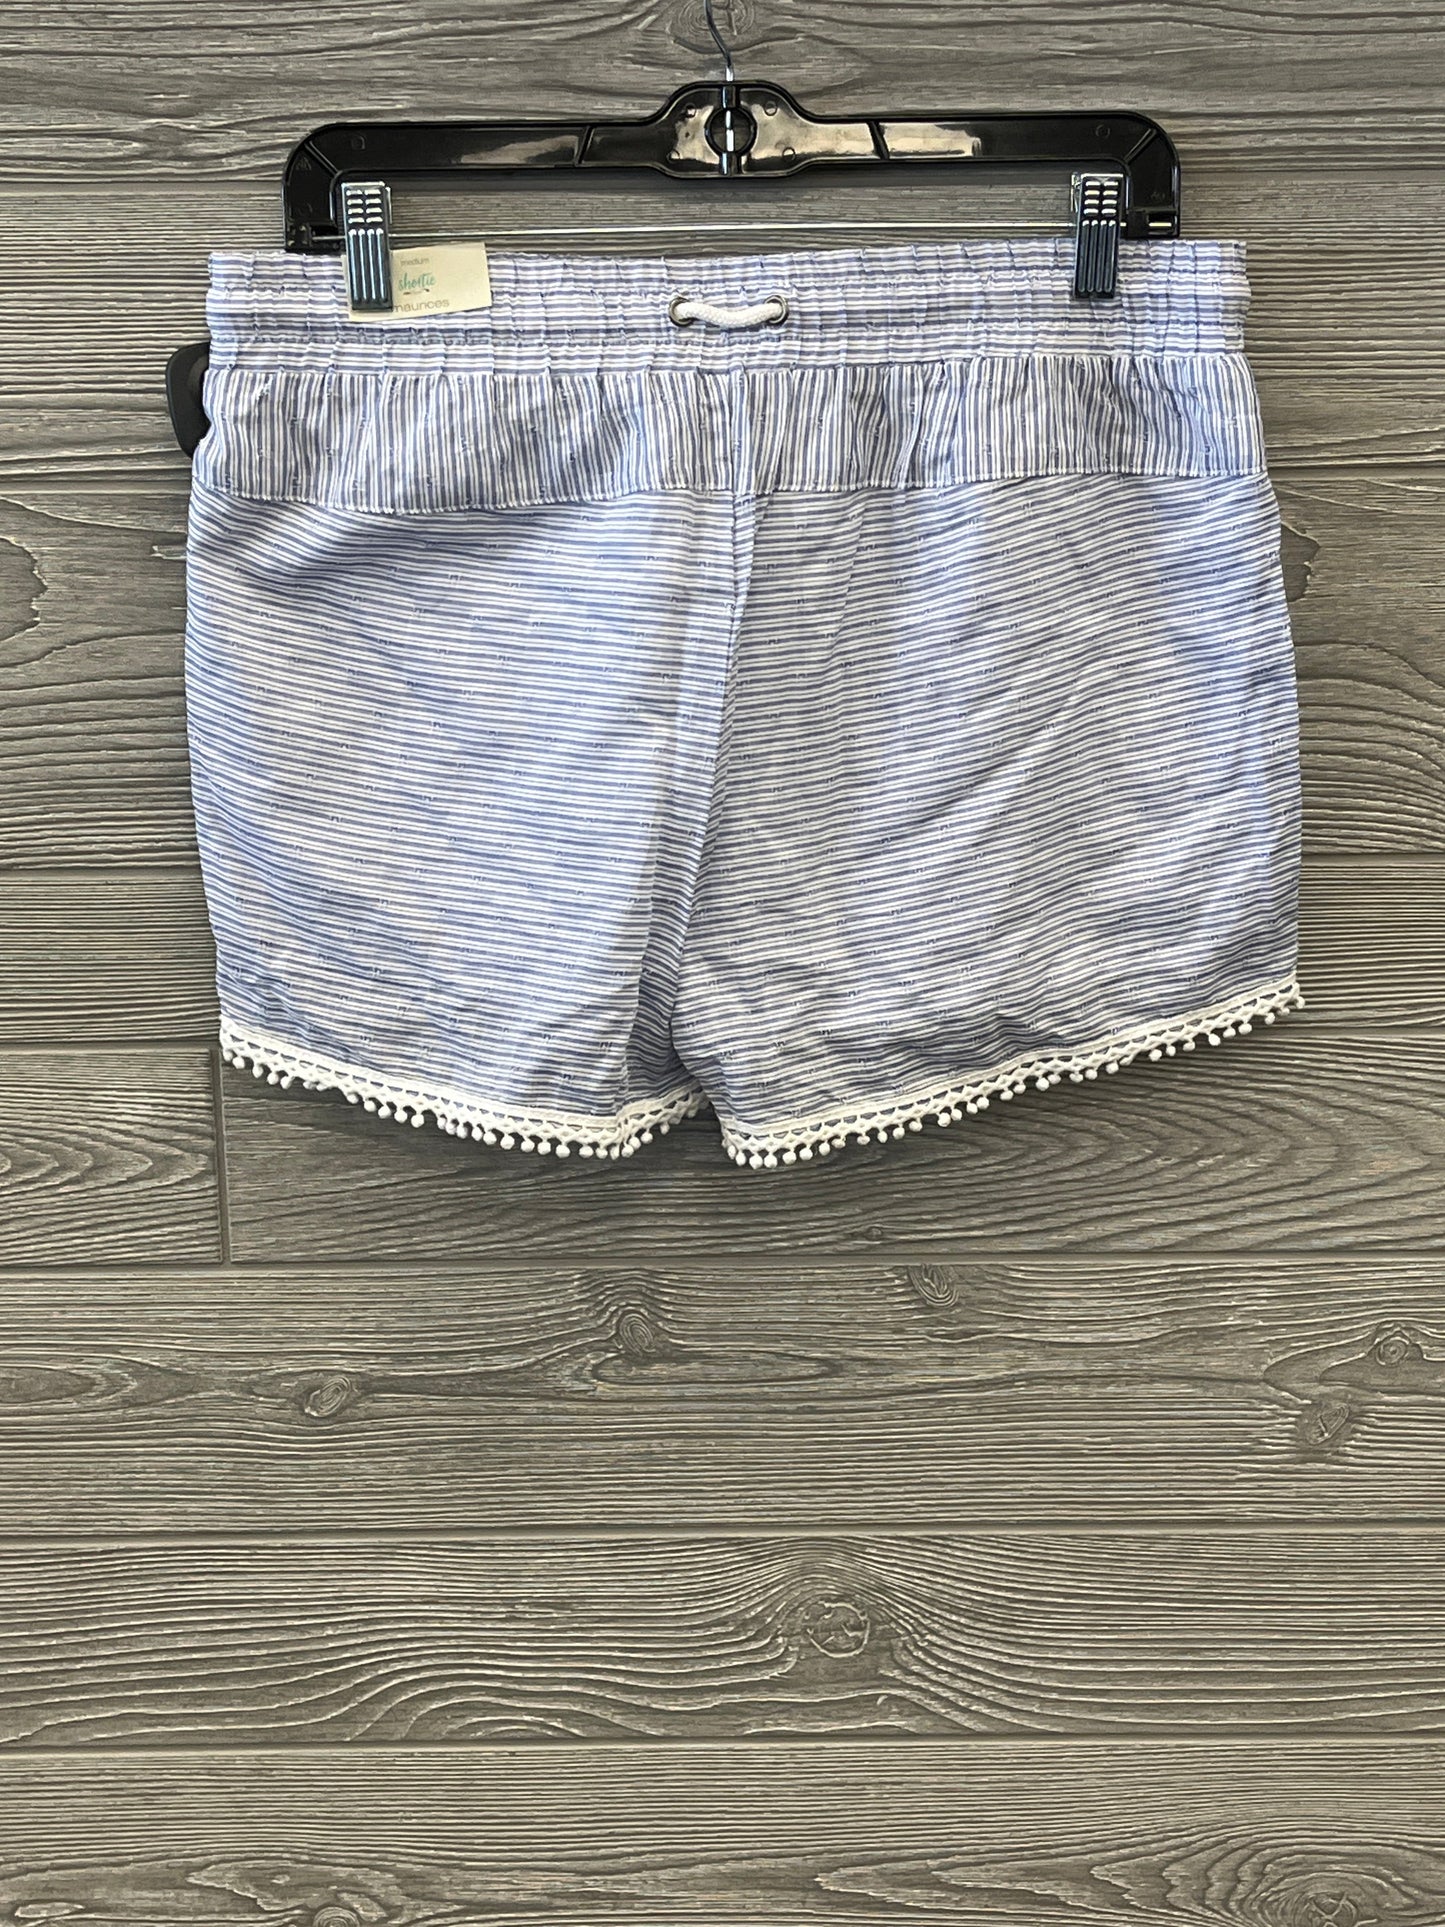 Shorts By Maurices  Size: 8